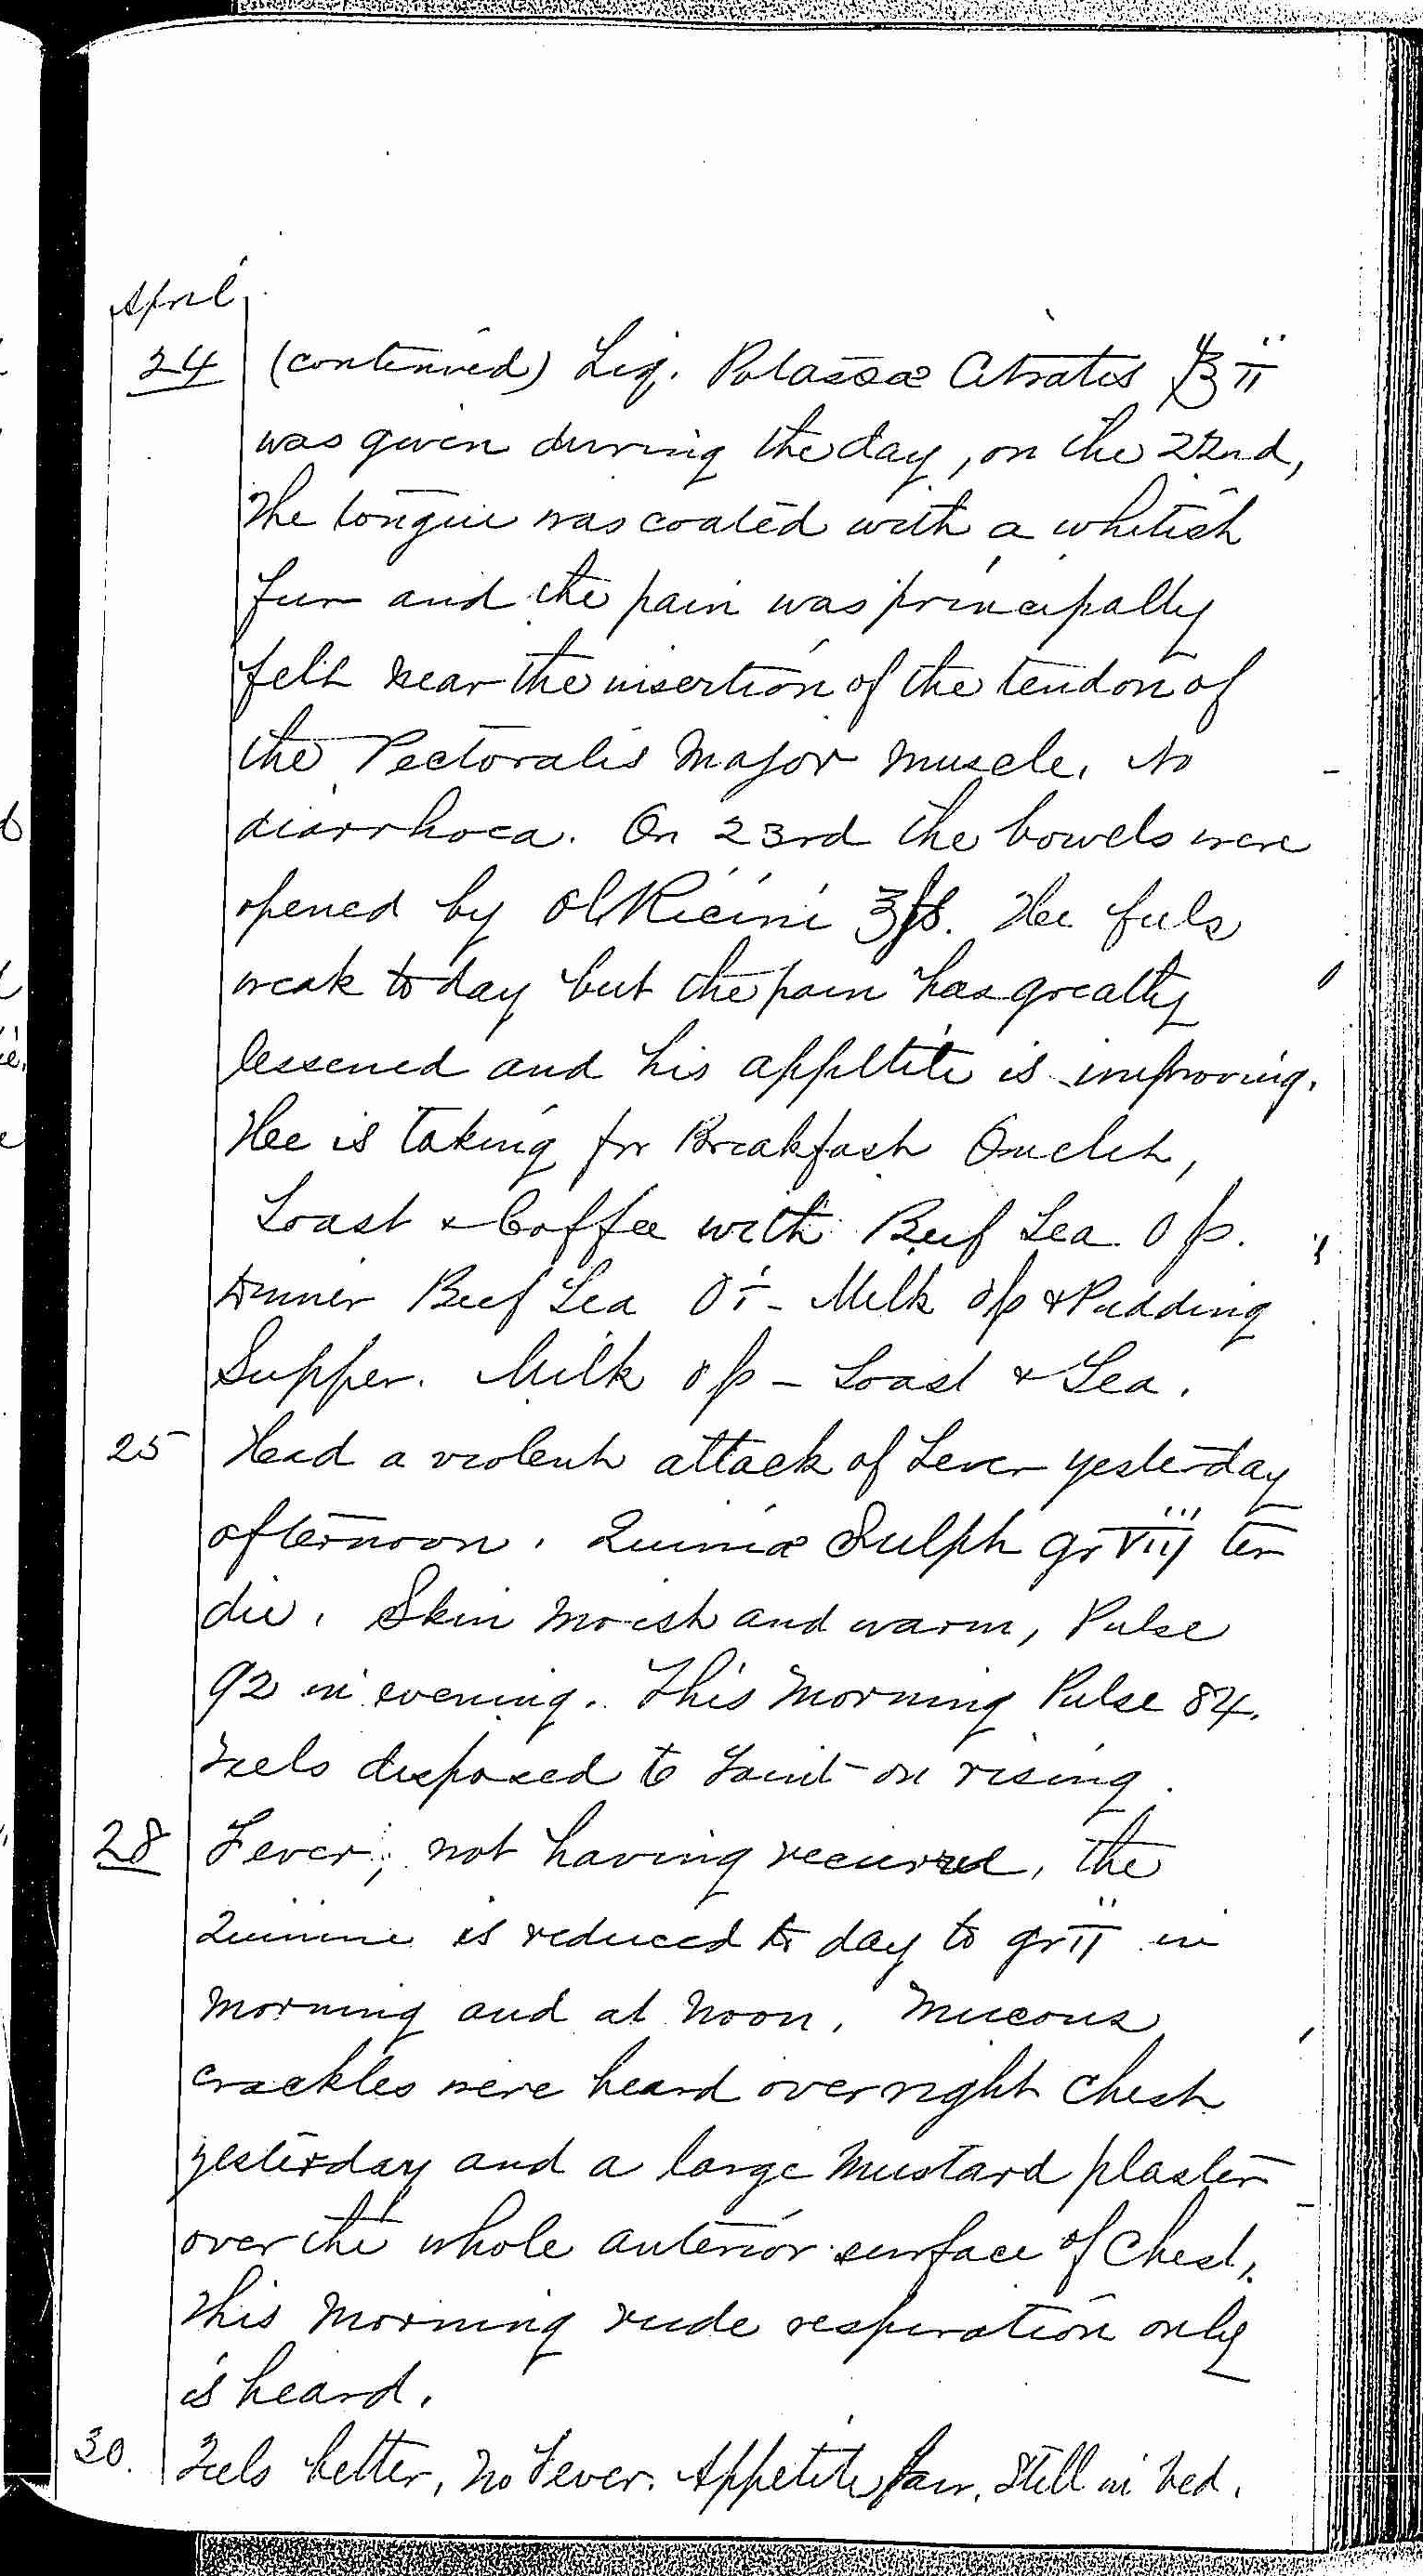 Entry for Peter C. Cheeks (page 13 of 16) in the log Hospital Tickets and Case Papers - Naval Hospital - Washington, D.C. - 1868-69